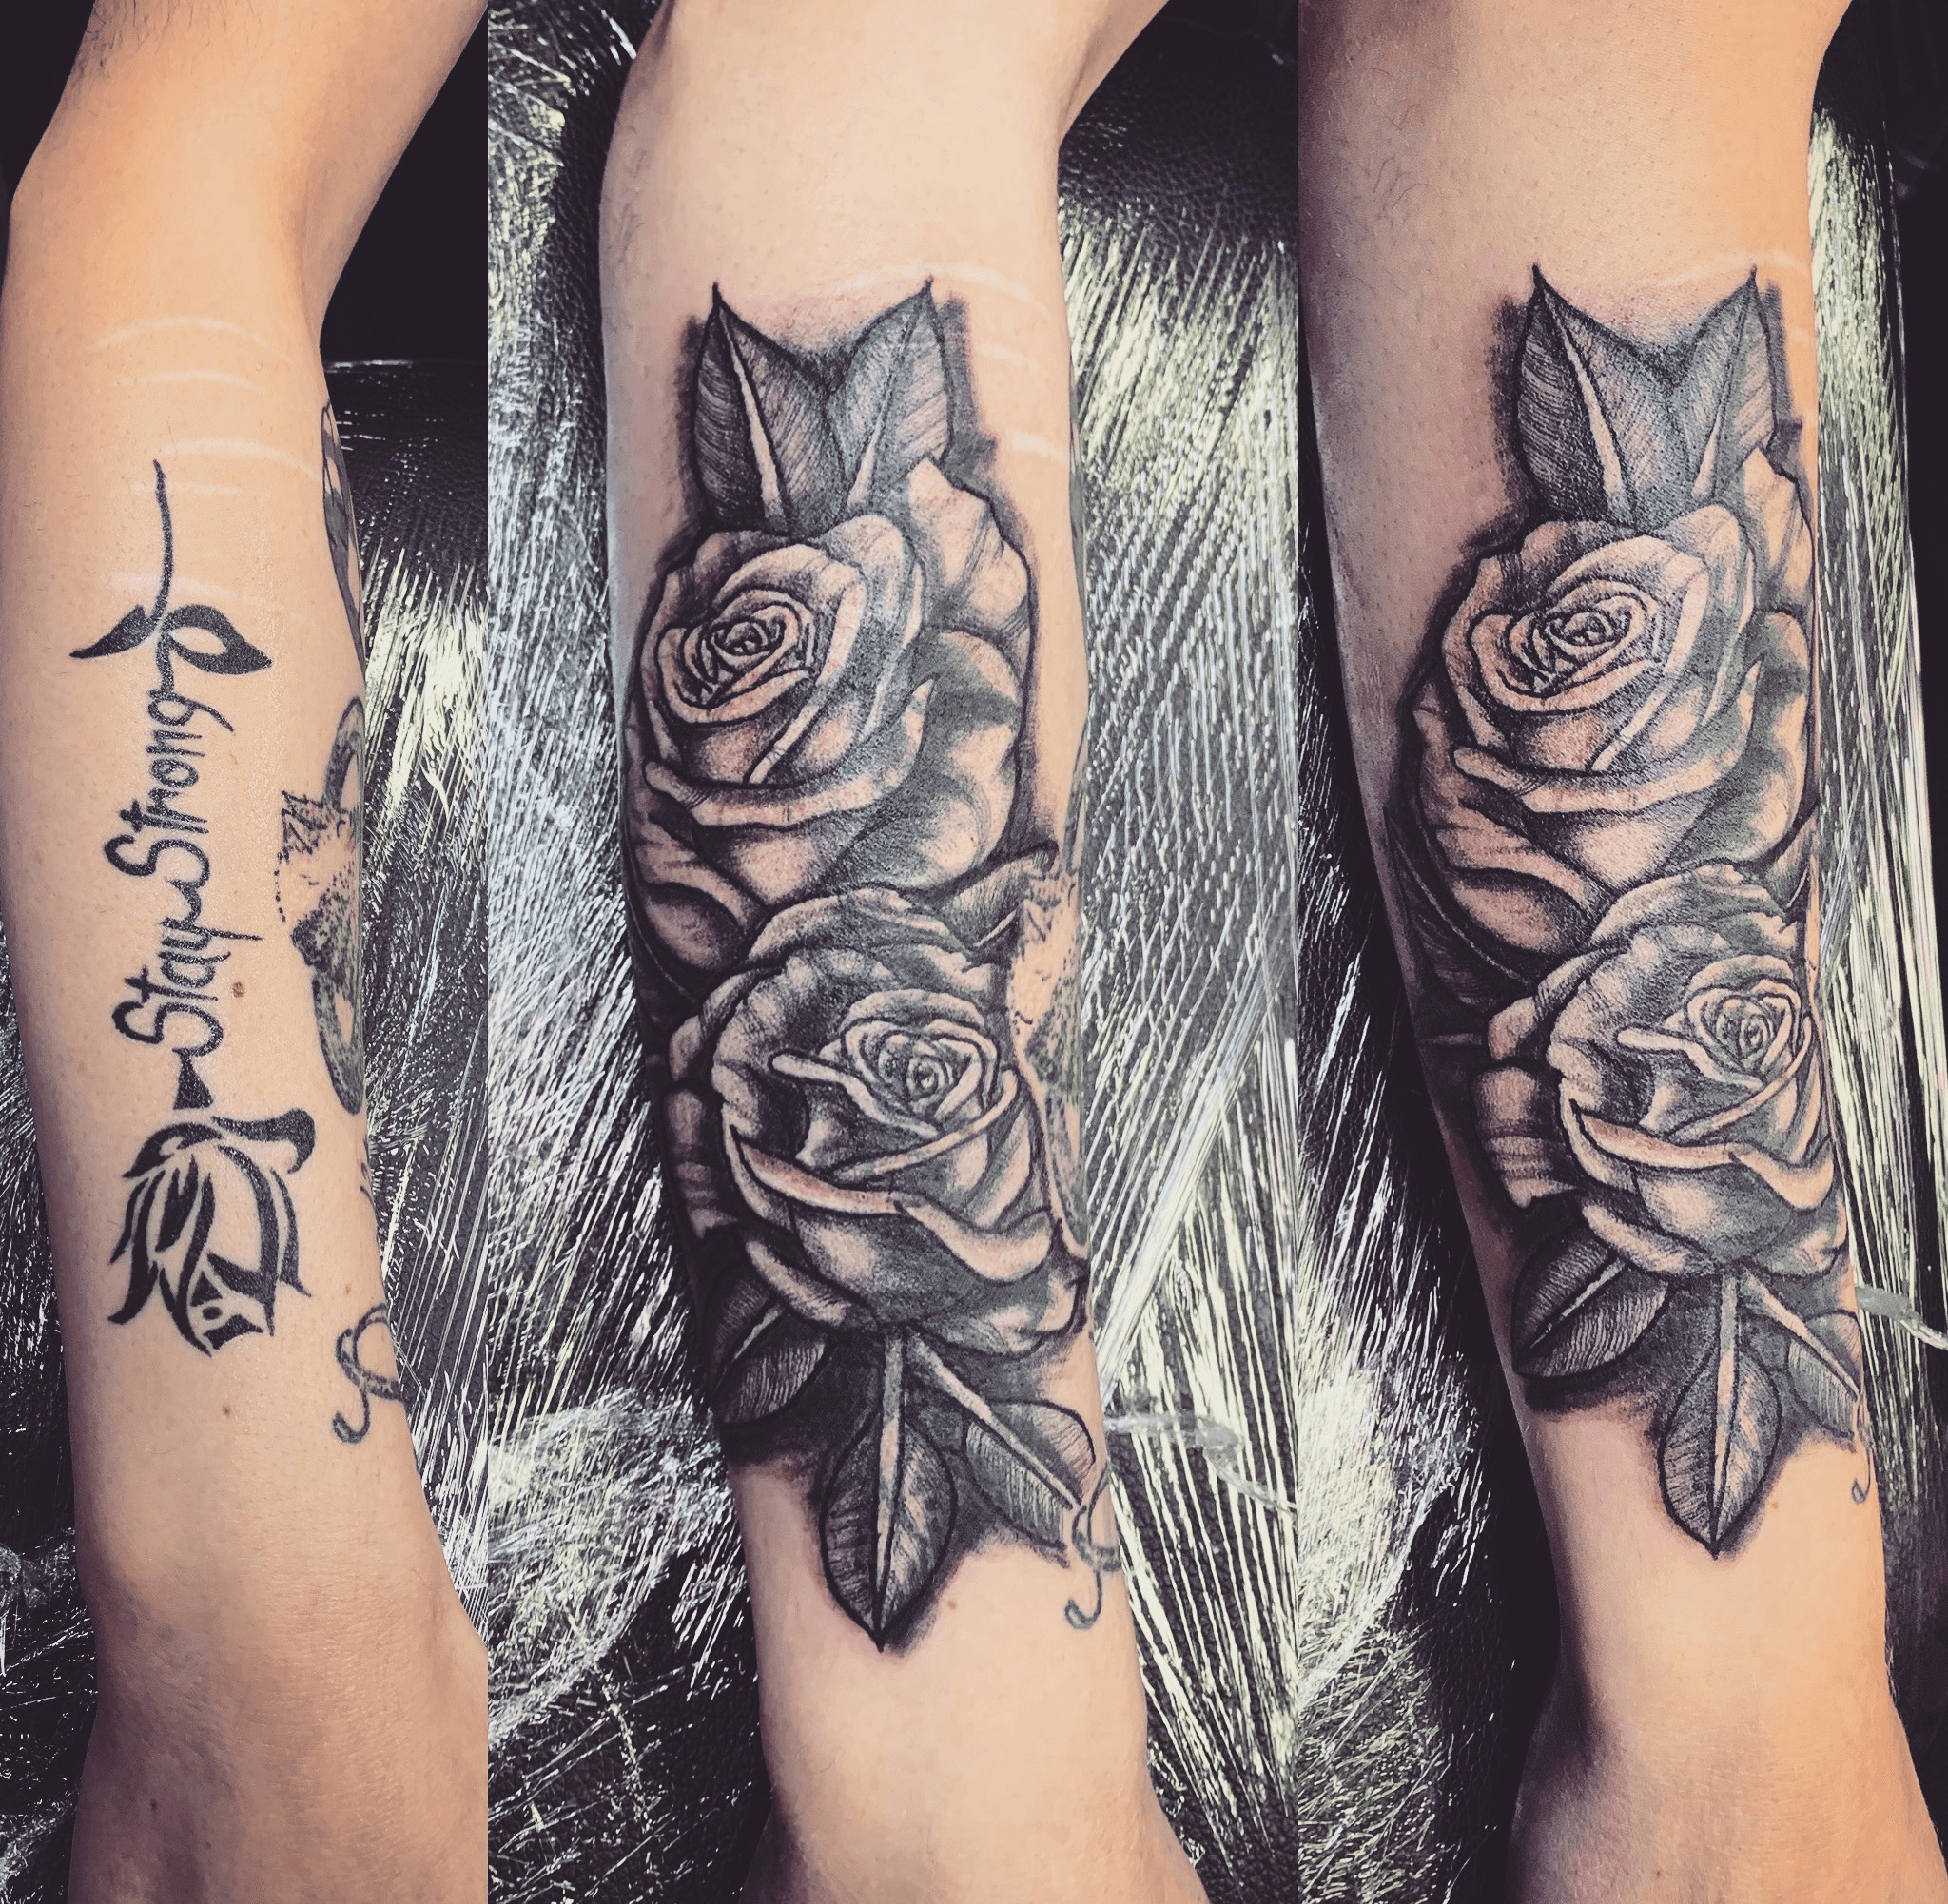 Wanted a rose tattoo and ended up covering an old dainty lettering tattoo  Its a lot bigger than I originally wanteddid he go overboard Sorry for  glare  peeling  rTattooDesigns